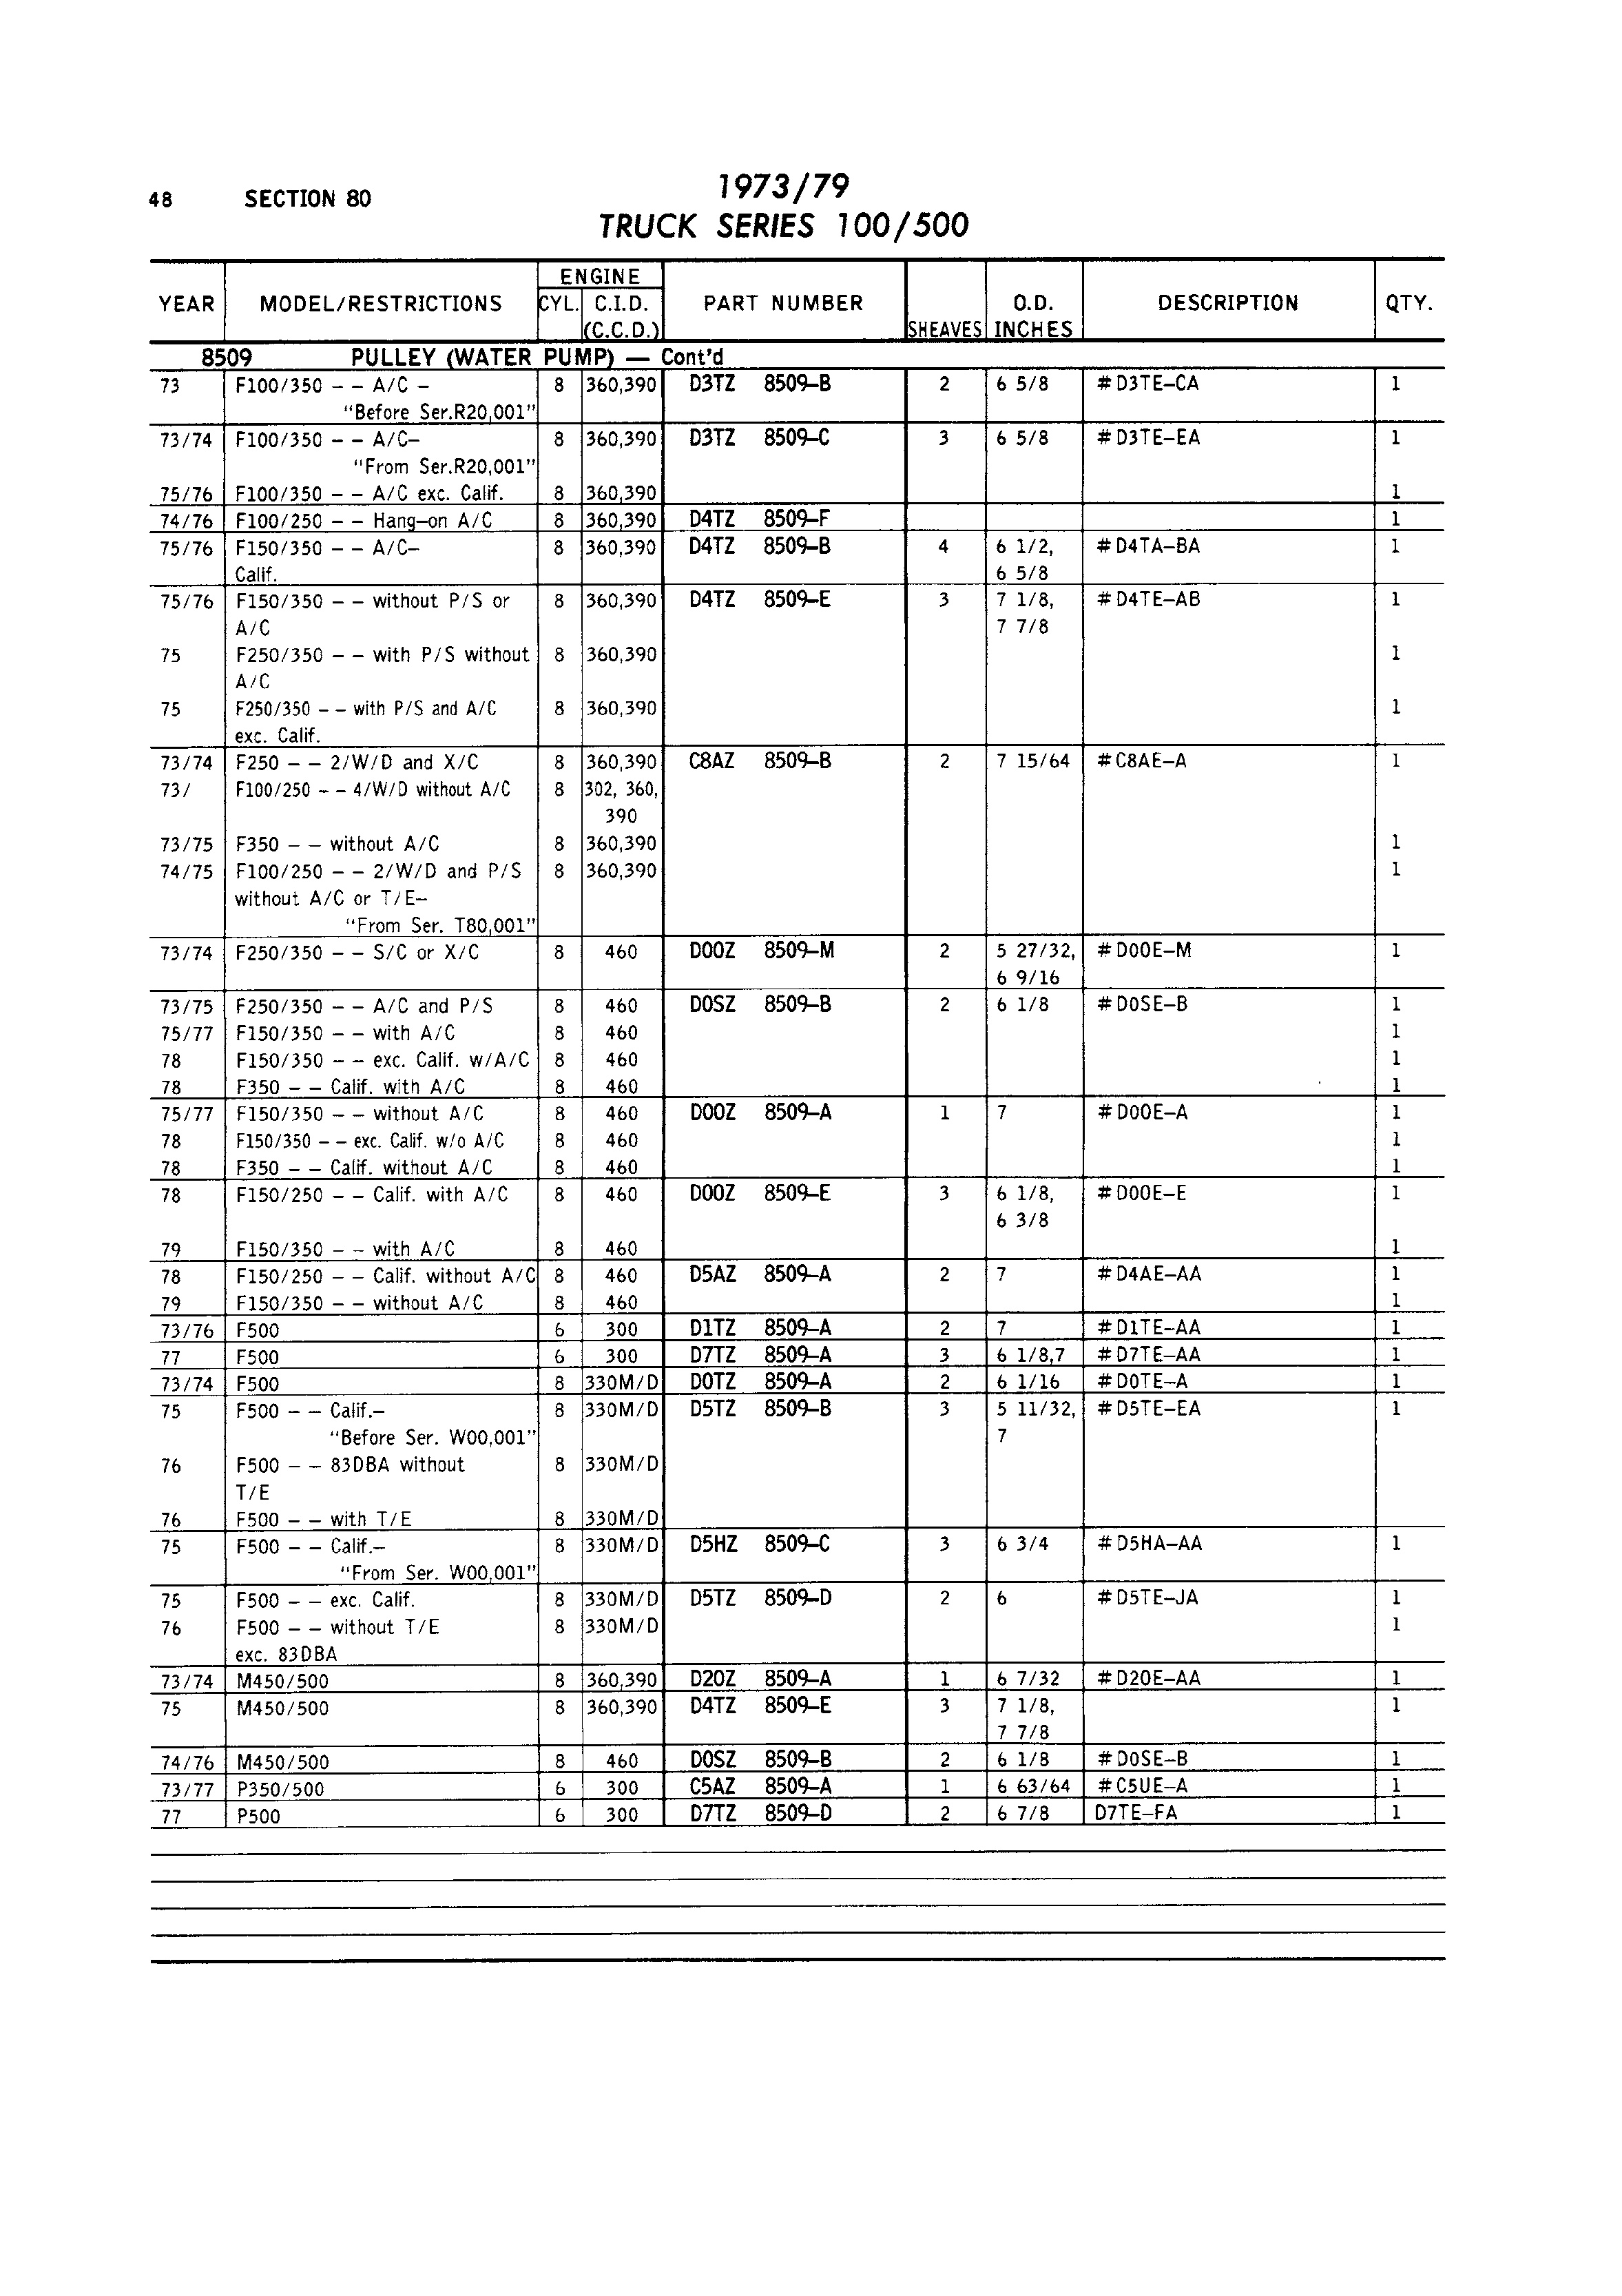 Identify parts off of a 67-72 generation truck - Page 3 - Ford Truck